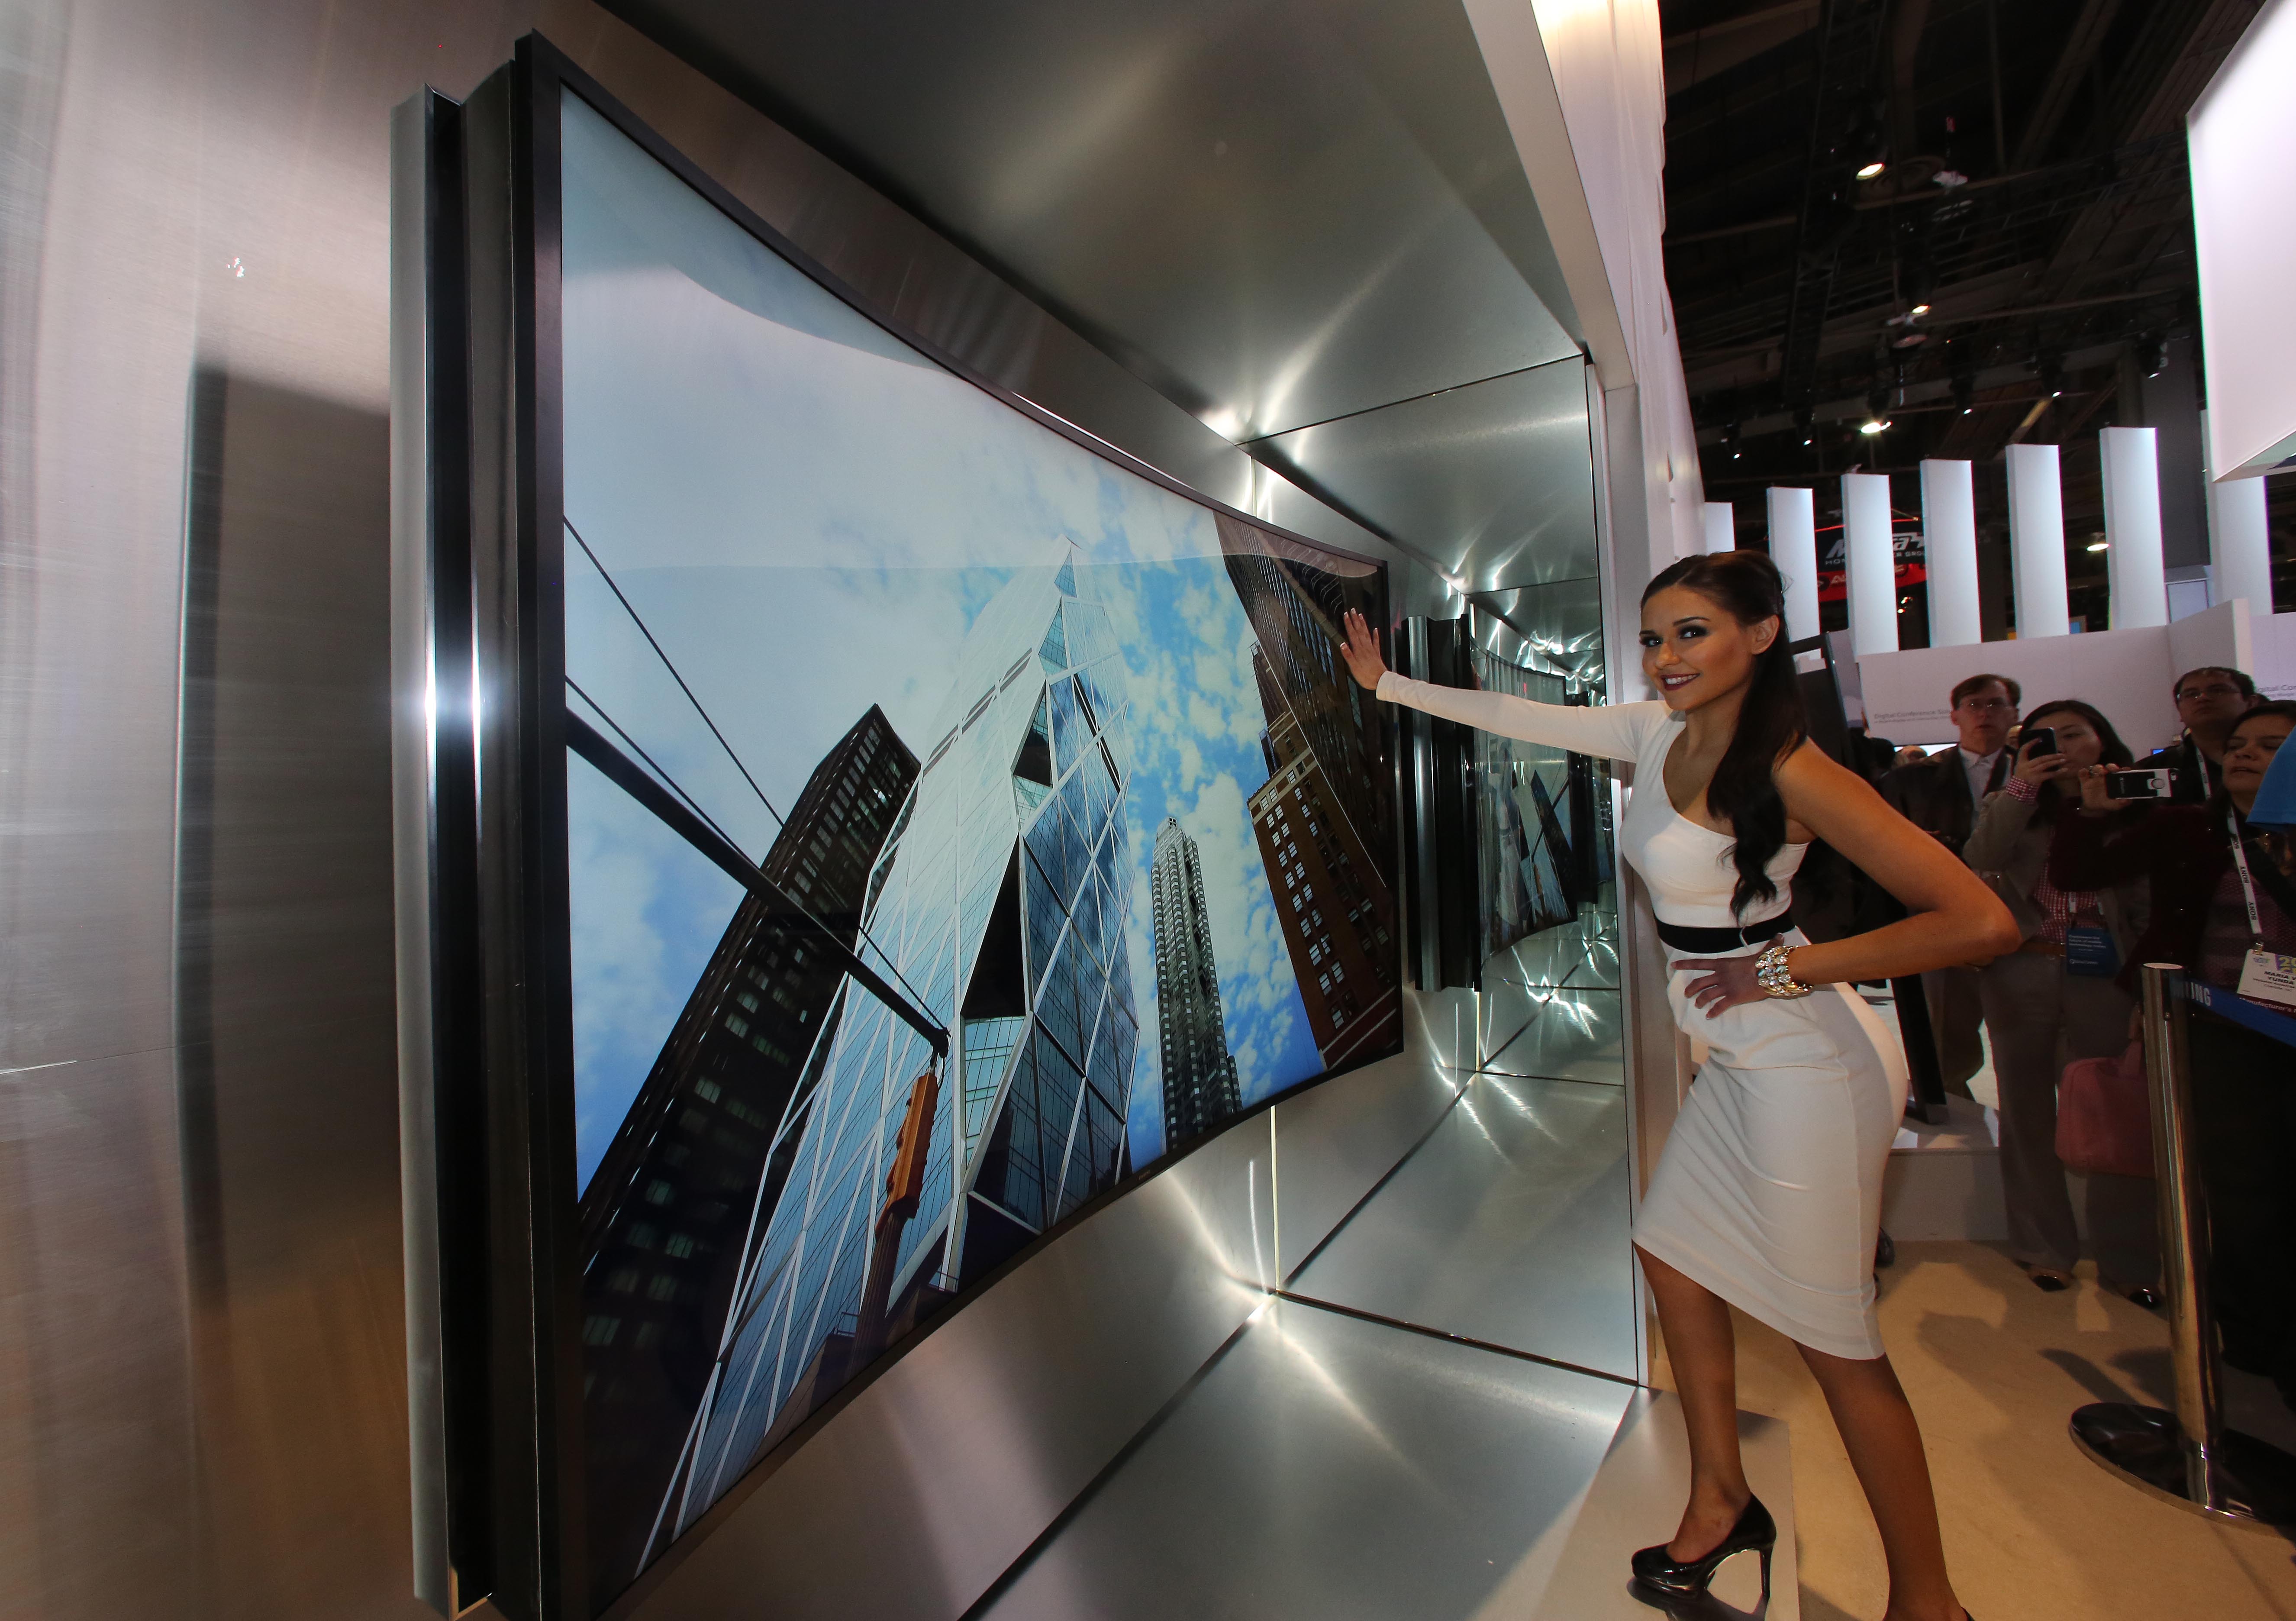 Samsung's 105-inch curved UHD TV and 85-inch bendable screen hit retail  this year